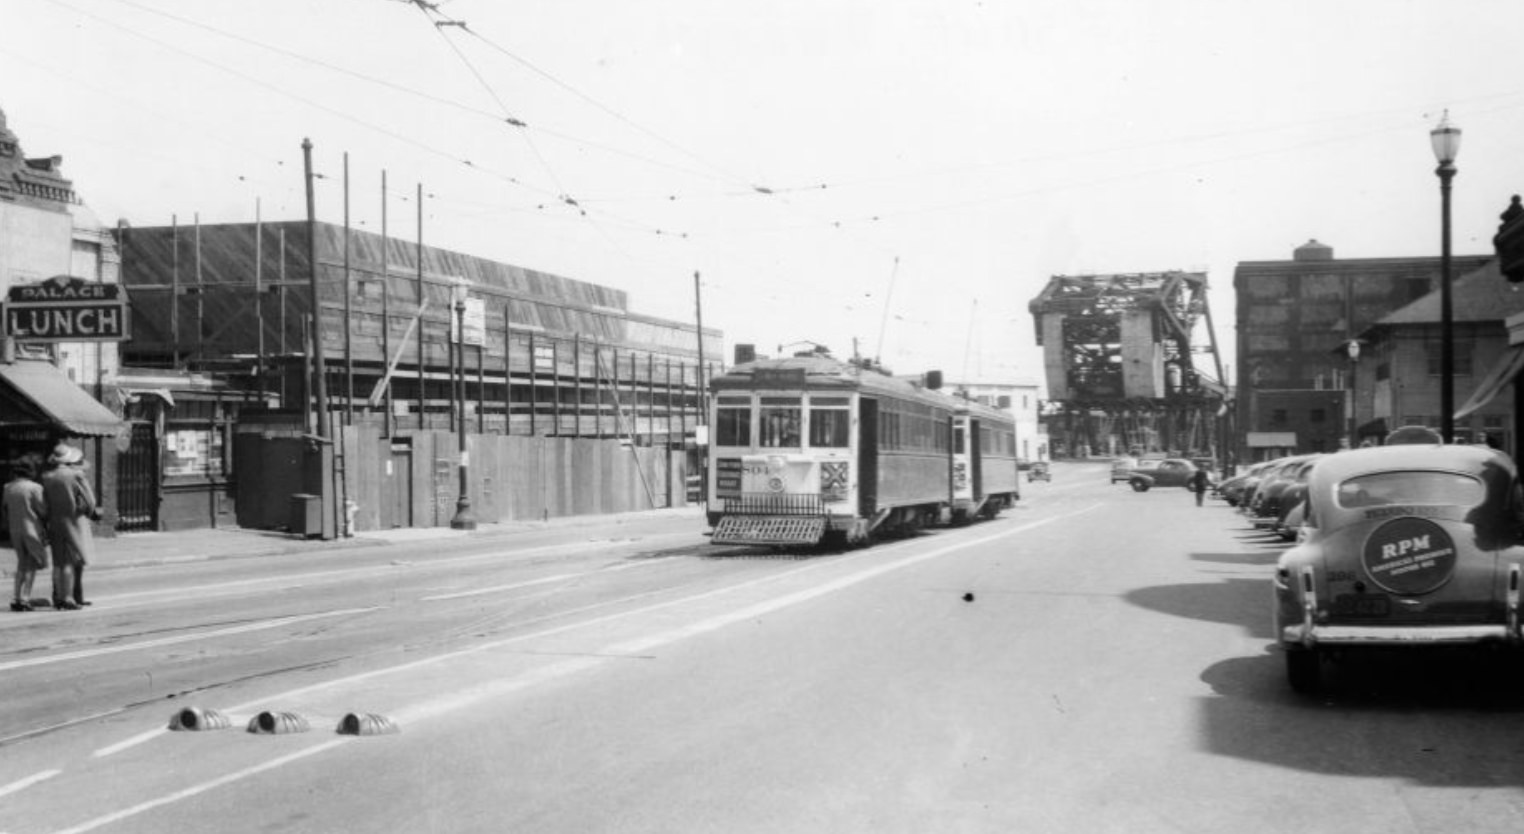 Facing south on Third Street in front of Southern Pacific Depot at Townsend, 1941